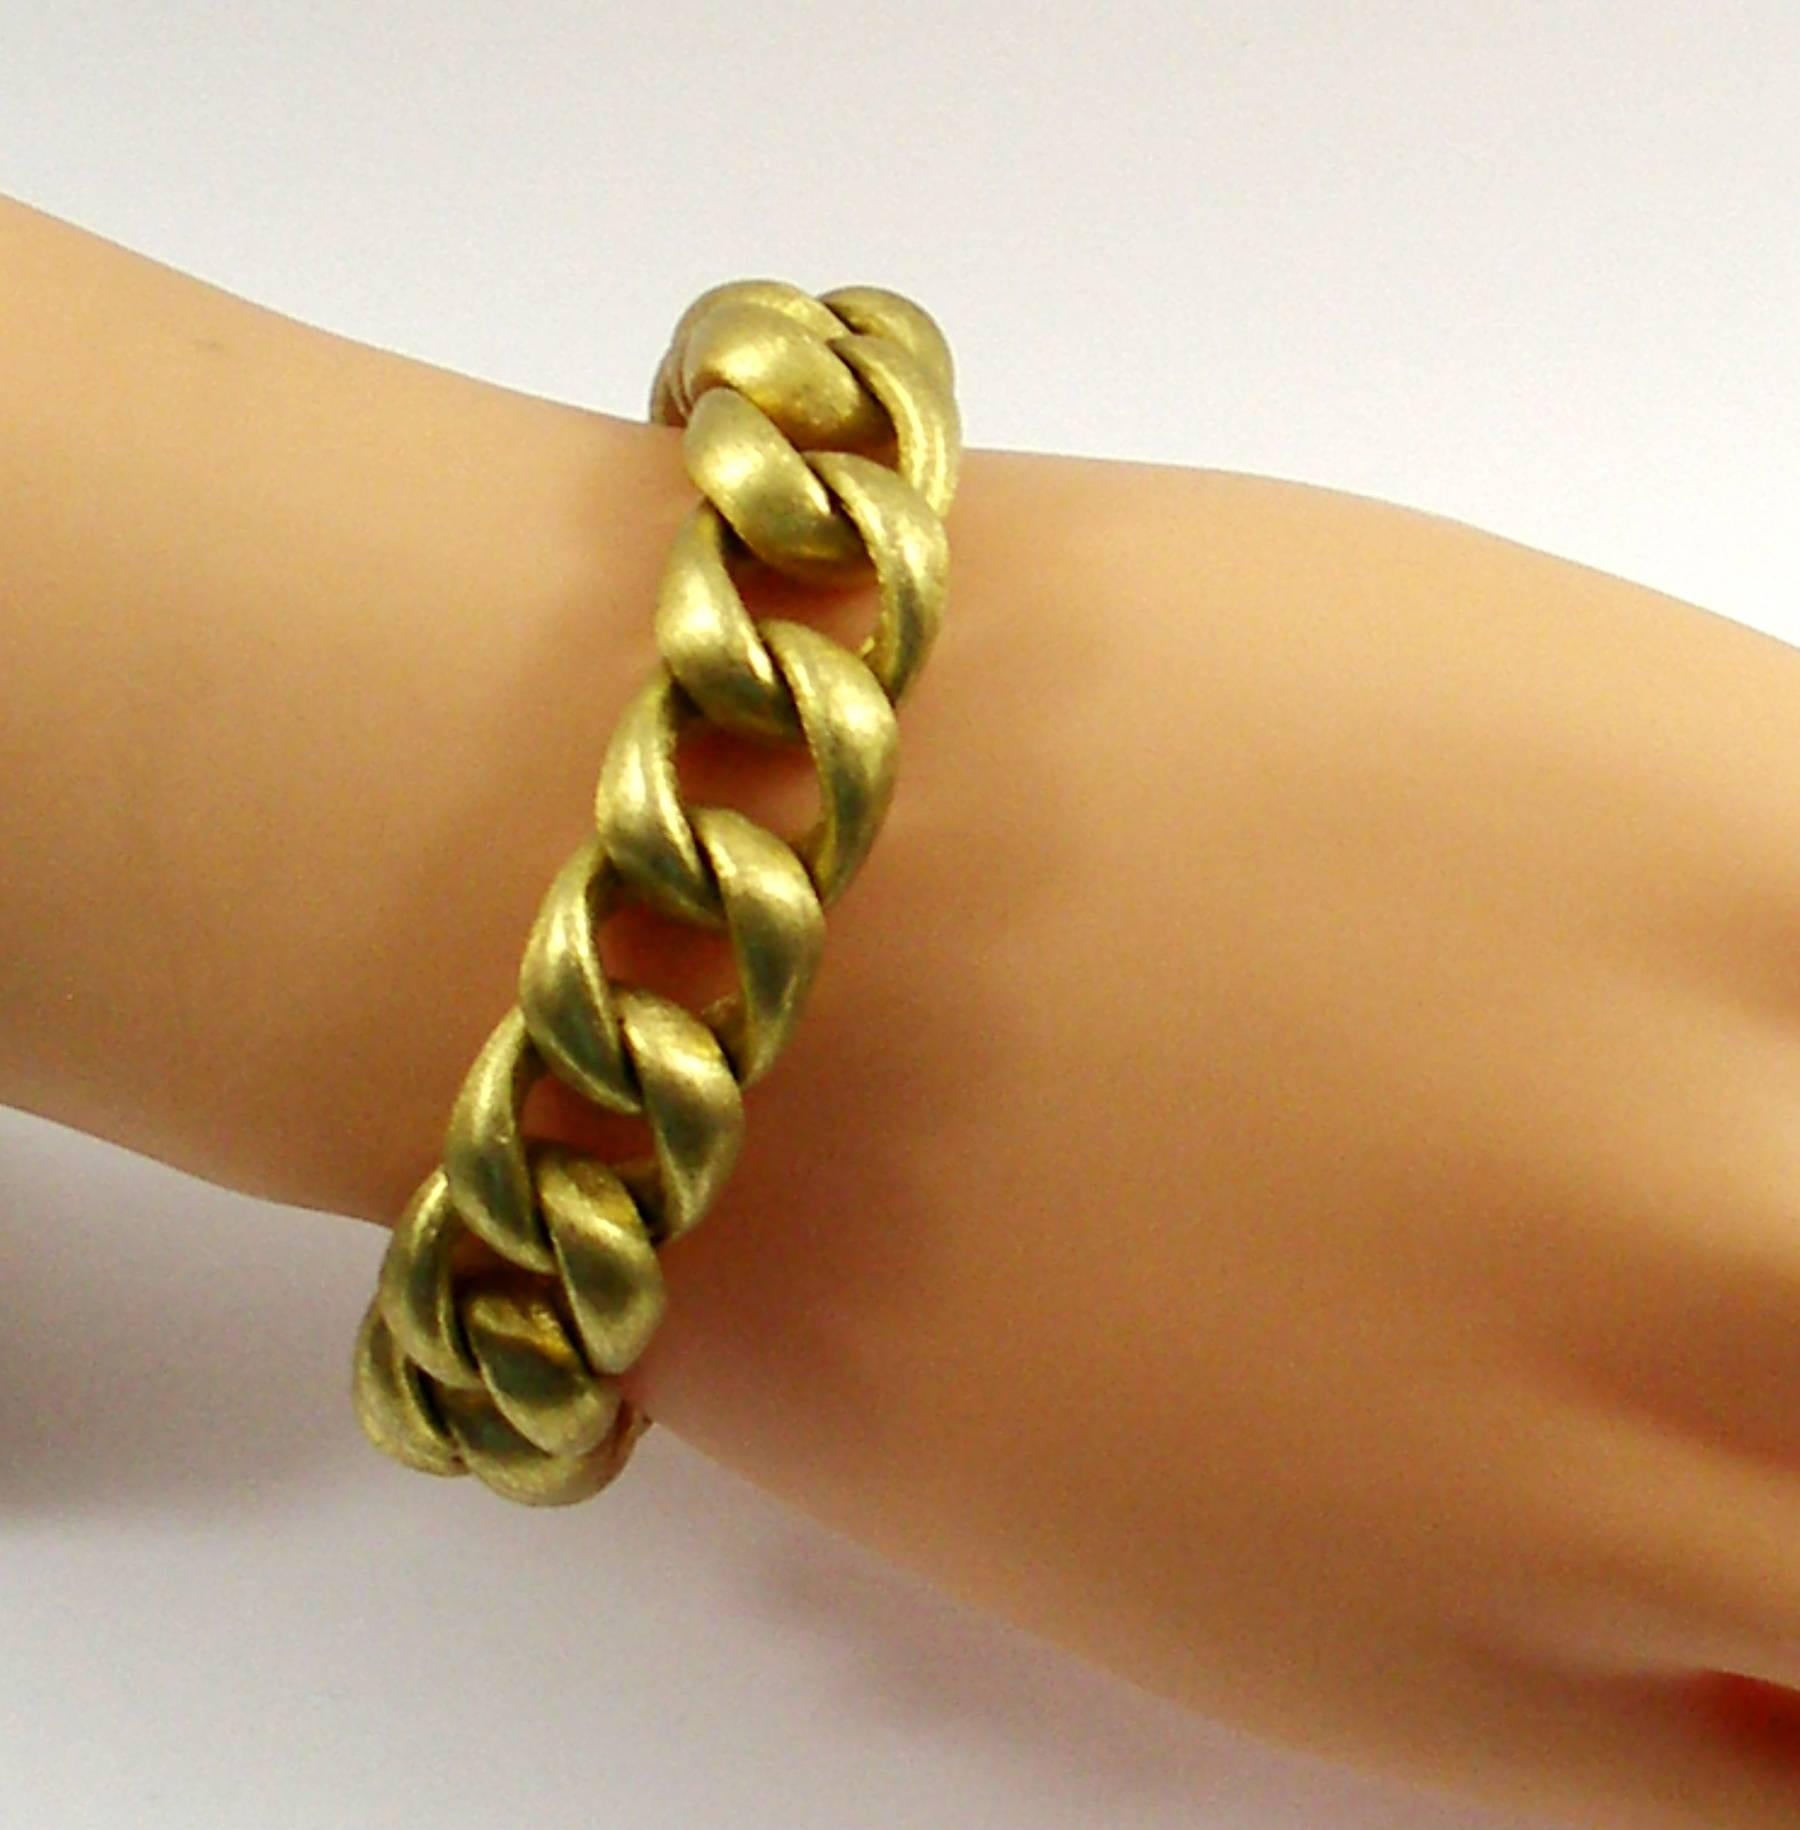 A richly Florentine finished bracelet in 18K yellow gold, comprised of 18 links, measuring 5/8 of an inch wide. Inside circumference measures 6 3/4 inches.